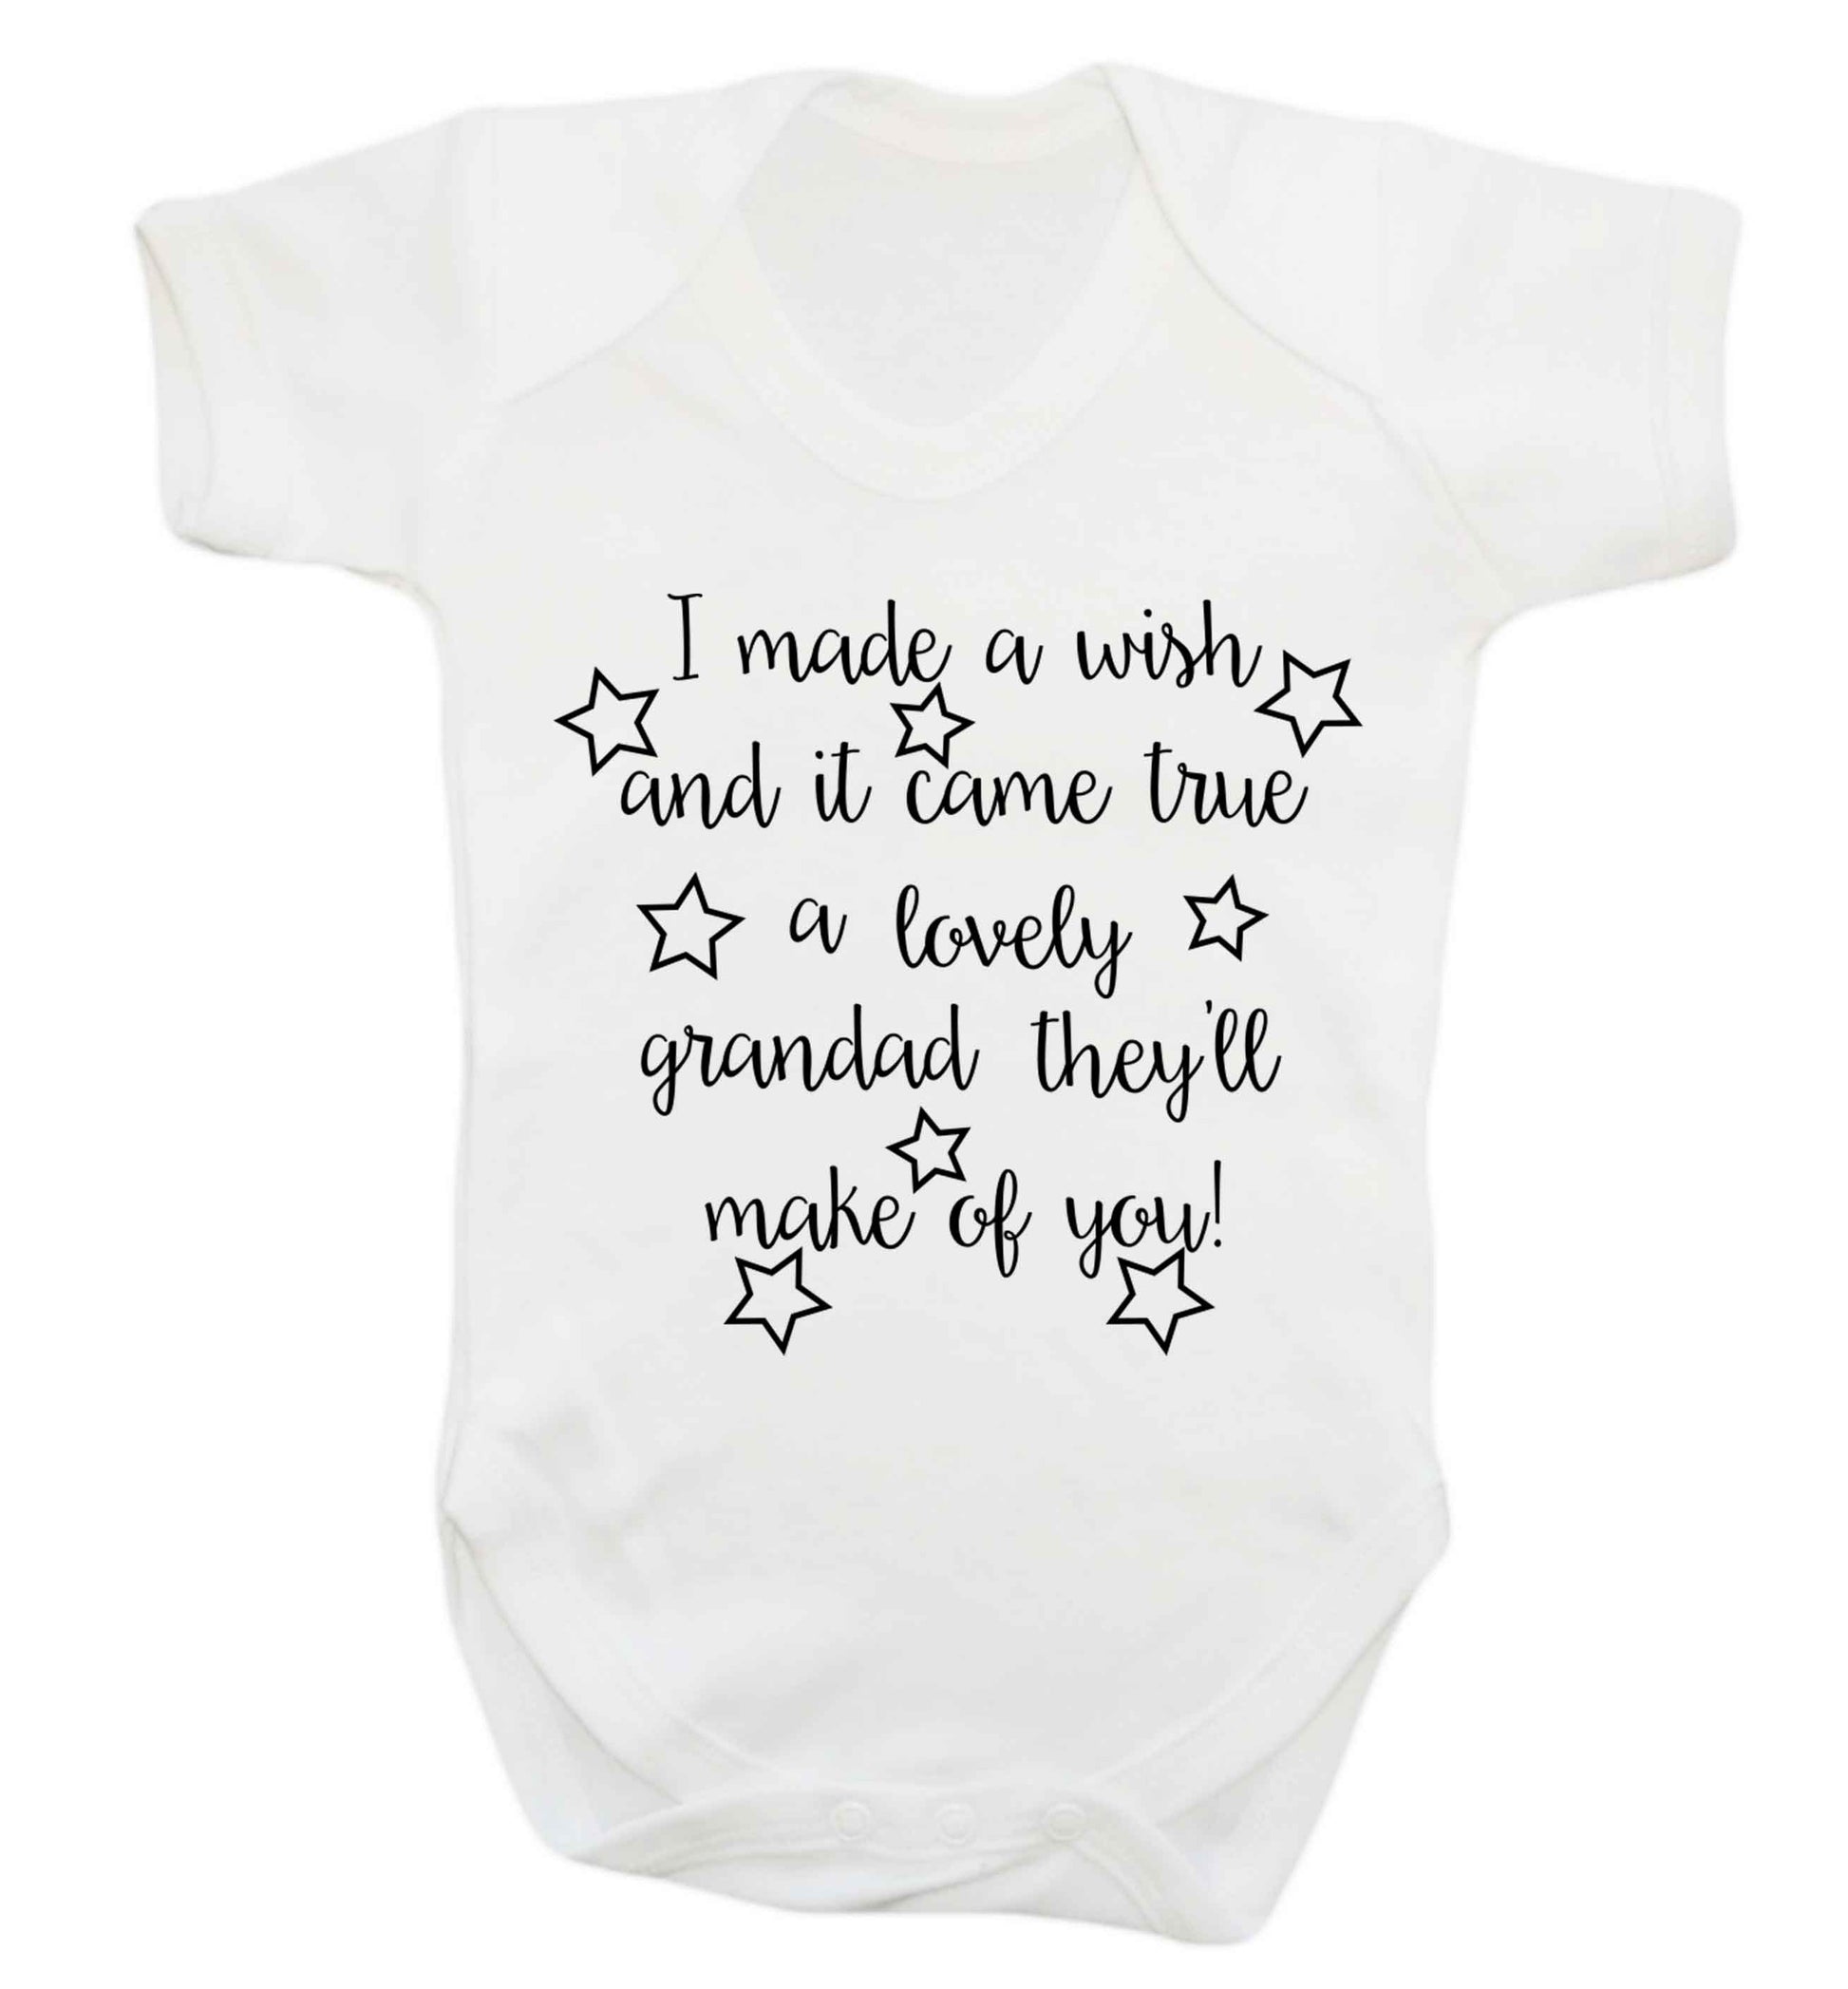 I made a wish and it came true a lovely grandad they'll make of you! Baby Vest white 18-24 months